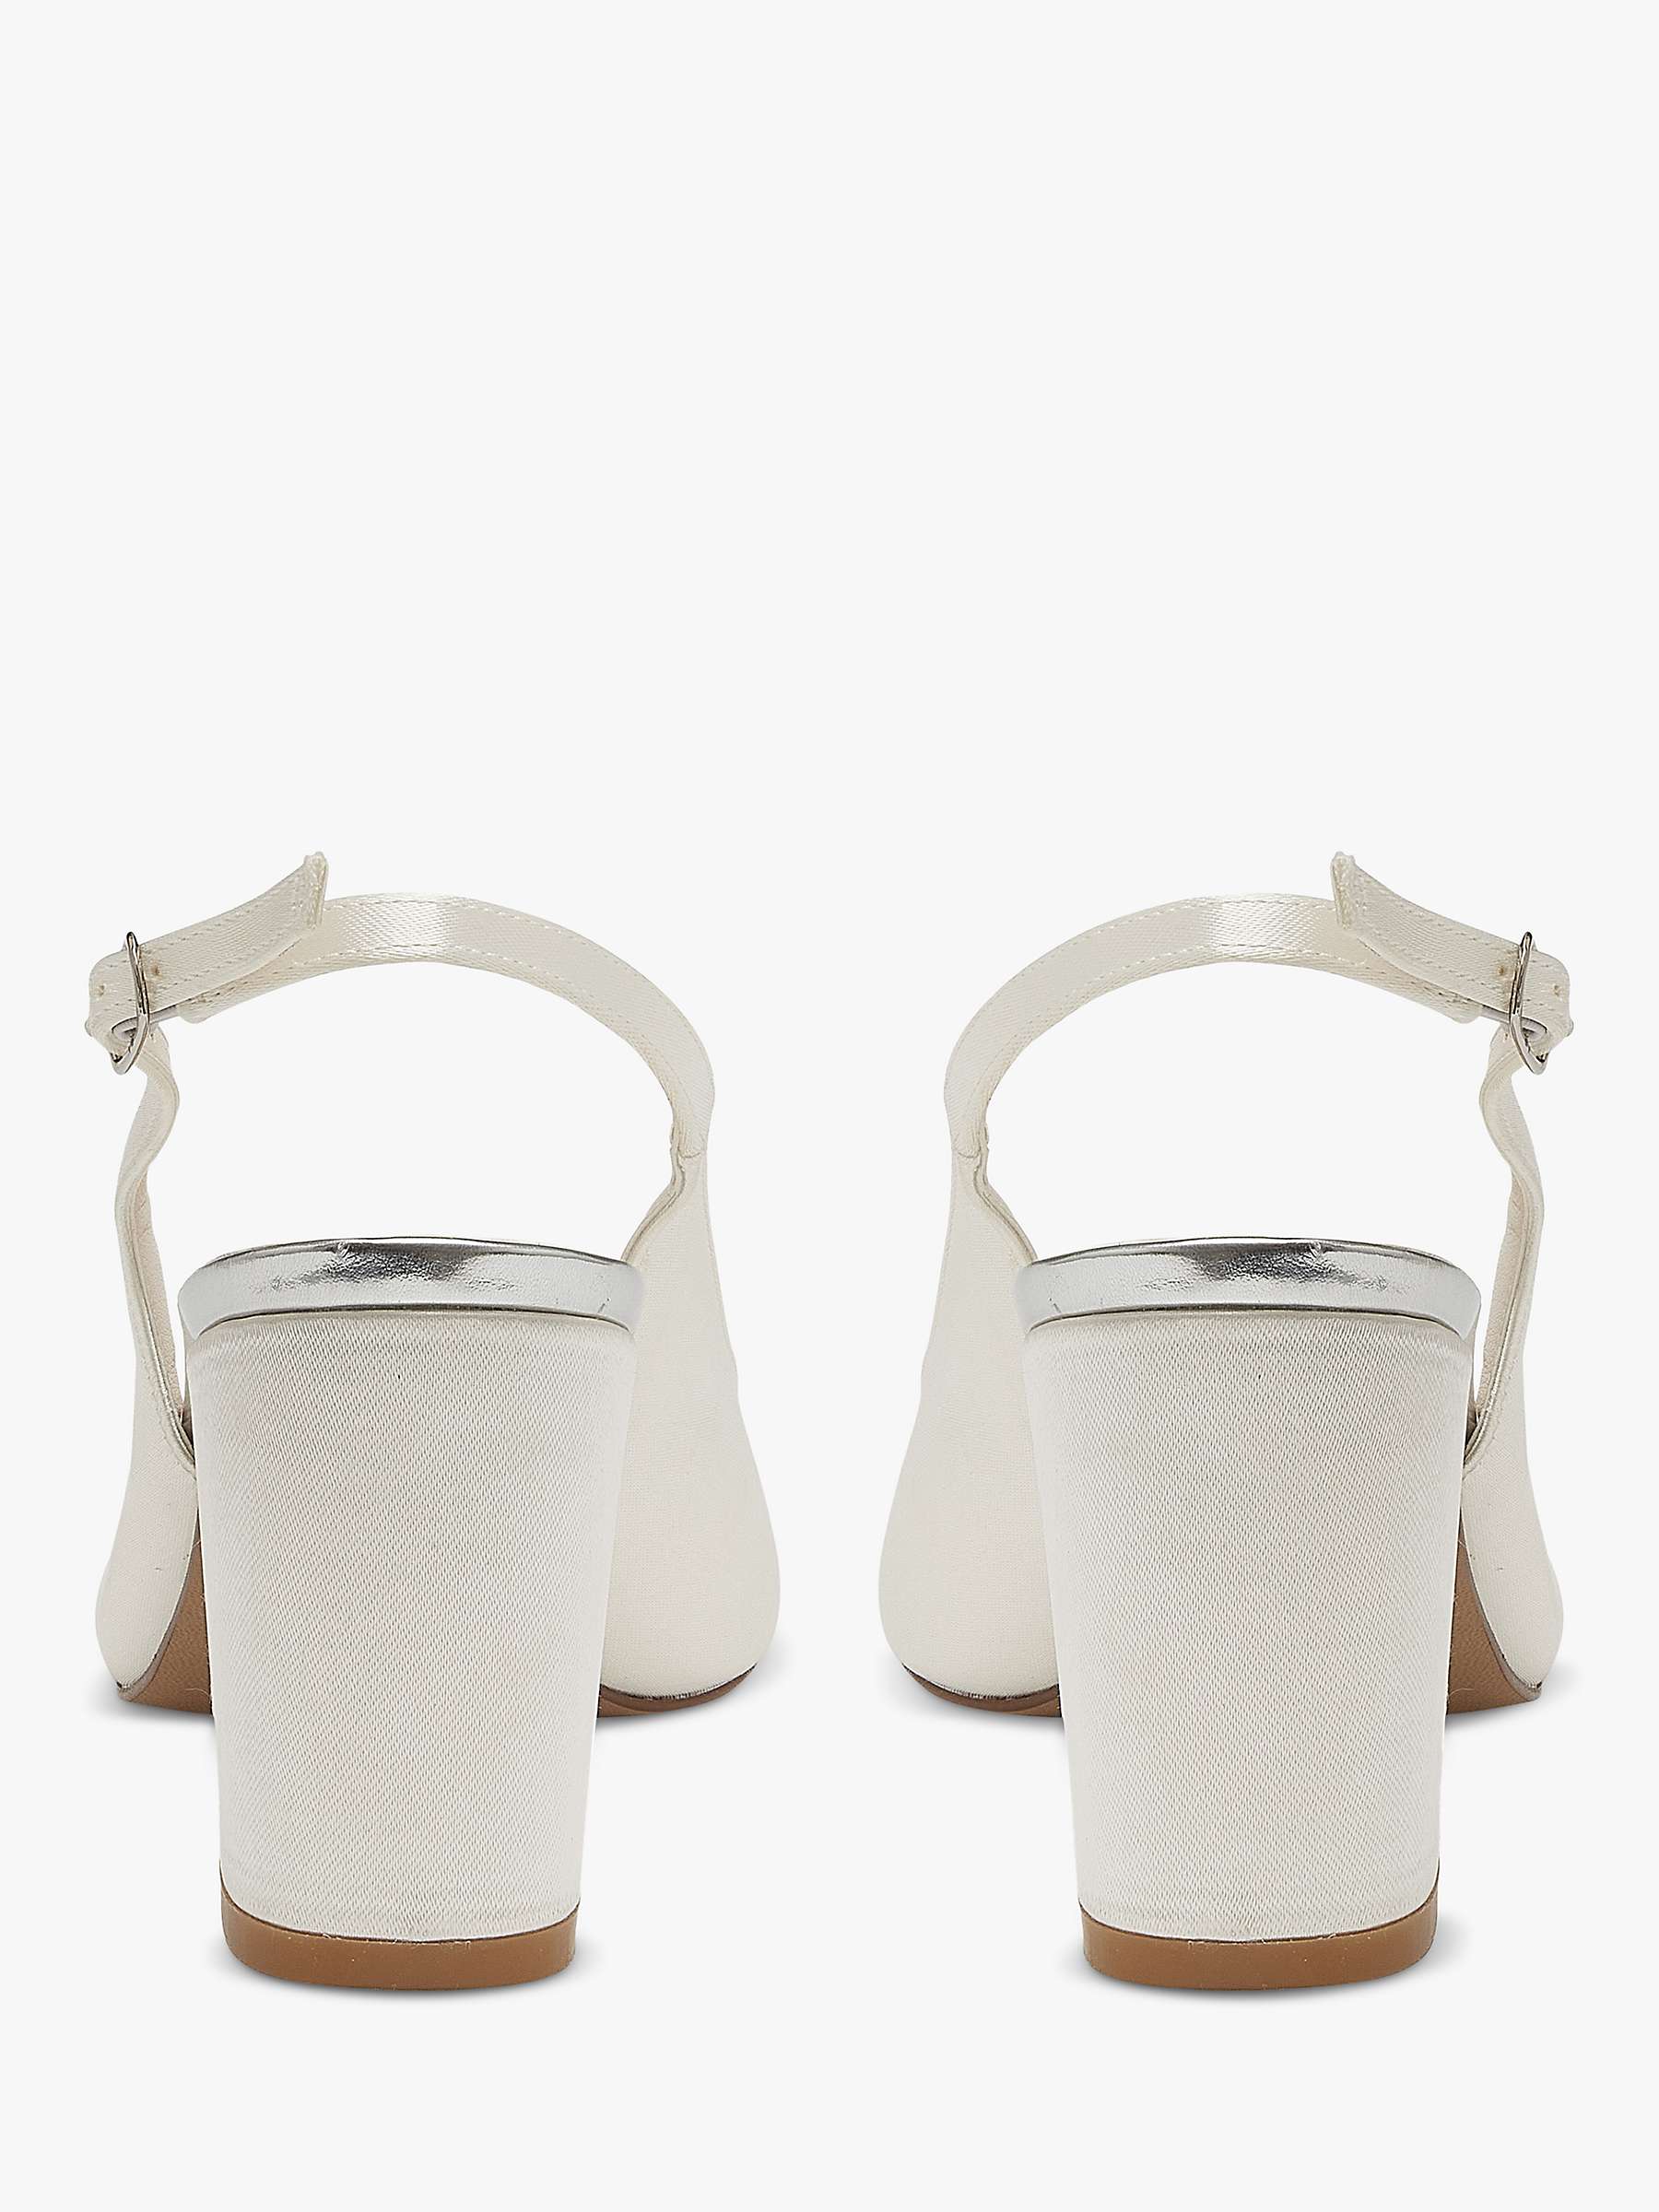 Buy Rainbow Club Faith+Fit Wide Court Shoes, Ivory Satin Online at johnlewis.com